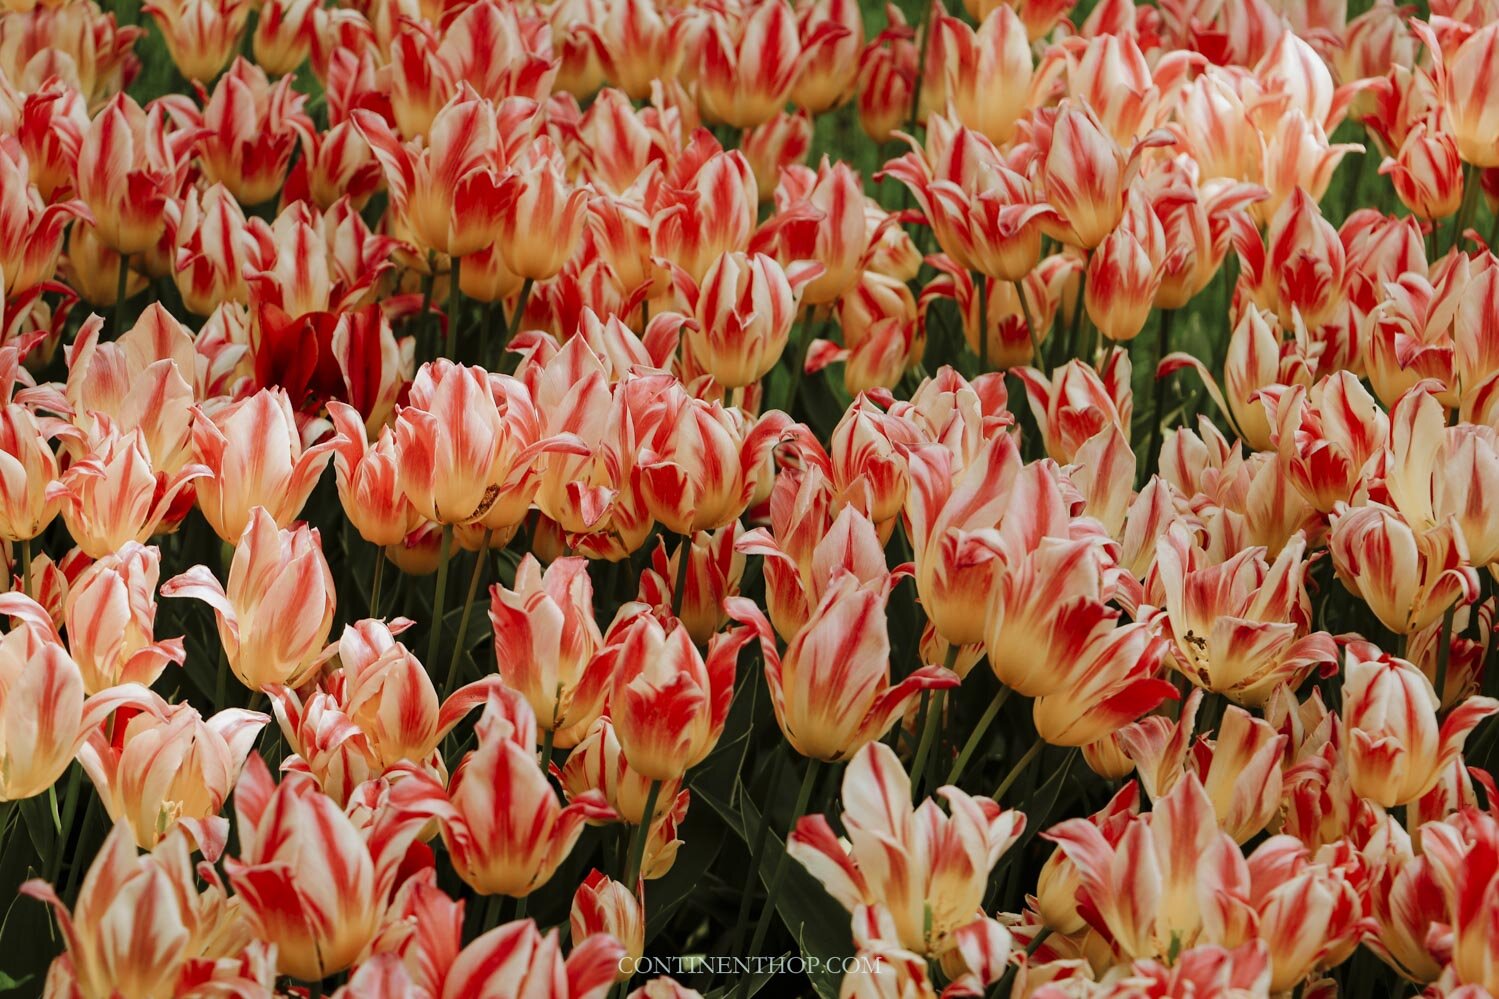 Striped red colored tulips at the tulip festival Amsterdam 2020